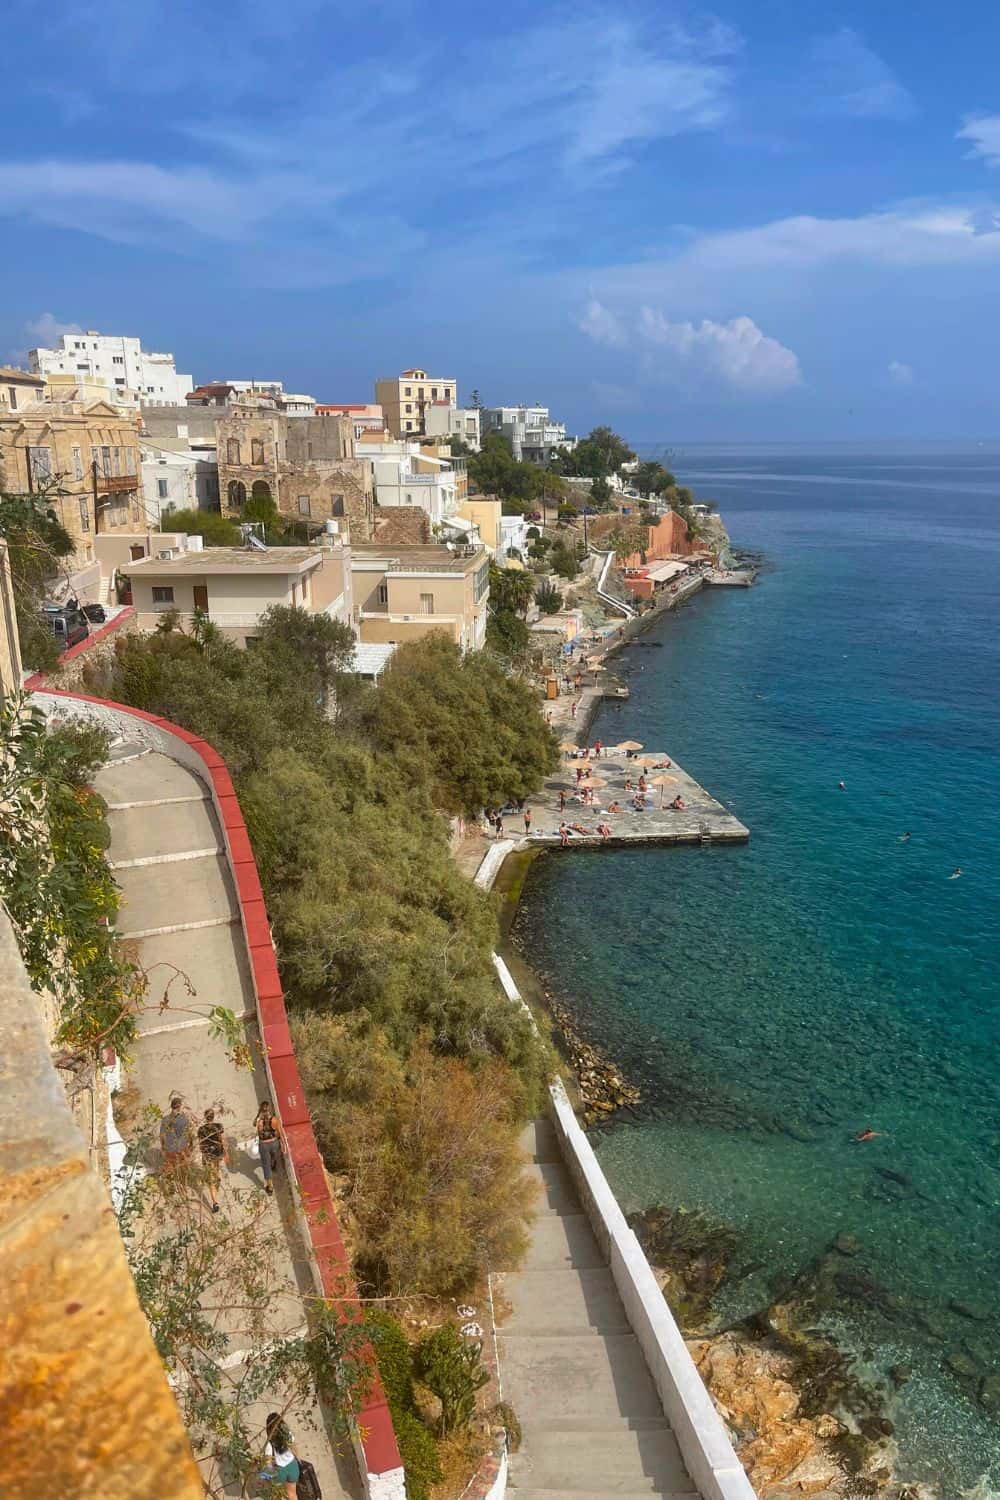 A coastal view from above showing a curving seaside promenade in Syros, with houses built along the cliff edge overlooking the clear blue waters of the Aegean Sea, and sunbathers enjoying the narrow beach below